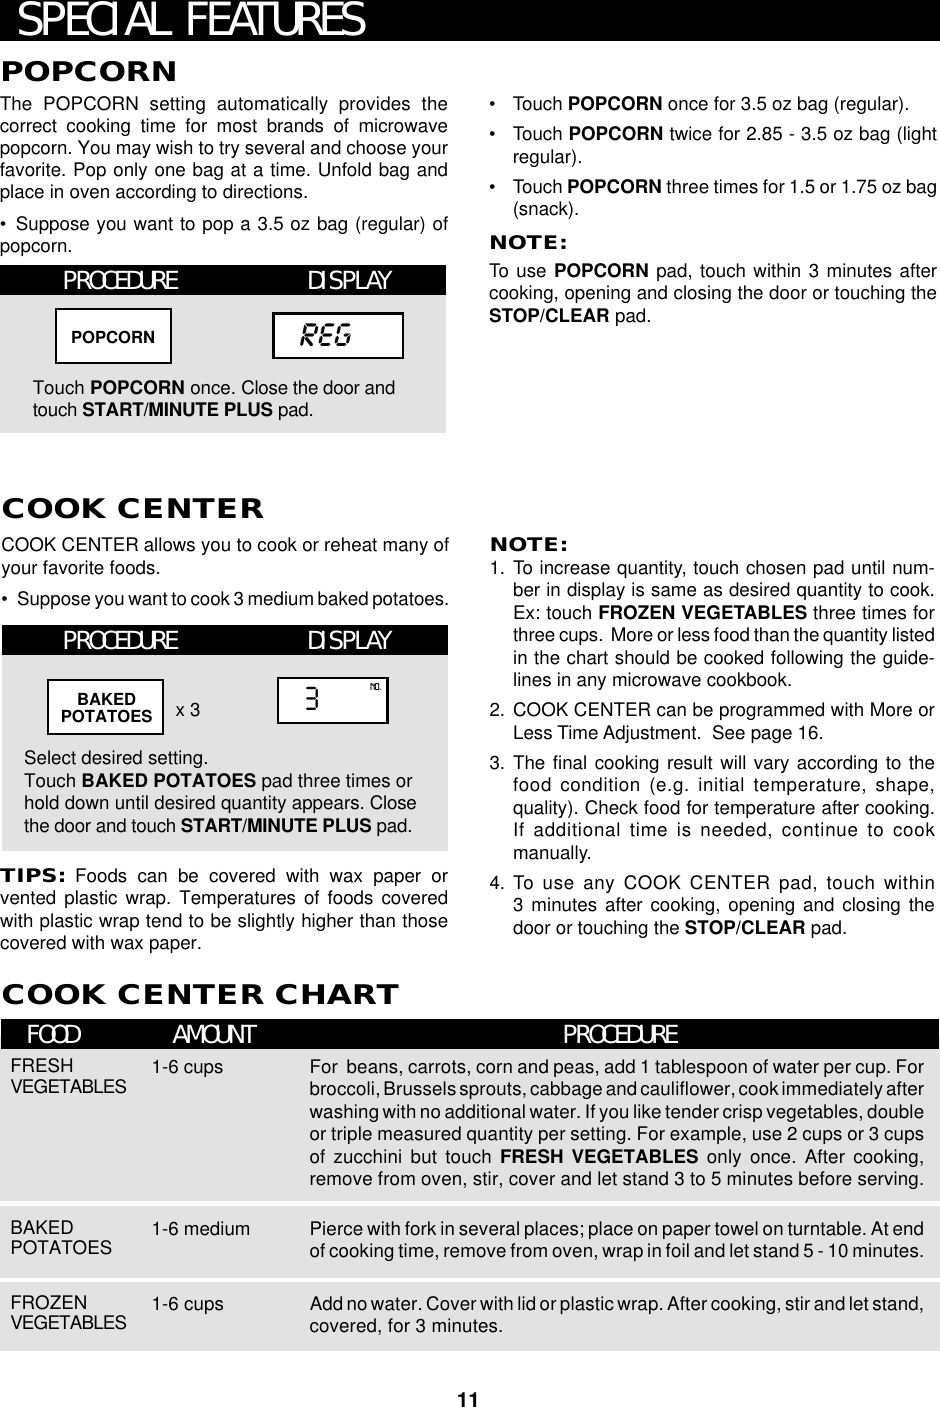 11COOK CENTER allows you to cook or reheat many ofyour favorite foods.•Suppose you want to cook 3 medium baked potatoes.COOK CENTERCOOK CENTER CHARTFOOD AMOUNT PROCEDURESPECIAL FEATURESNOTE:1. To increase quantity, touch chosen pad until num-ber in display is same as desired quantity to cook.Ex: touch FROZEN VEGETABLES three times forthree cups.  More or less food than the quantity listedin the chart should be cooked following the guide-lines in any microwave cookbook.2. COOK CENTER can be programmed with More orLess Time Adjustment.  See page 16.3. The final cooking result will vary according to thefood condition (e.g. initial temperature, shape,quality). Check food for temperature after cooking.If additional time is needed, continue to cookmanually.4. To  use any COOK CENTER pad, touch within3 minutes after cooking, opening and closing thedoor or touching the STOP/CLEAR pad.Select desired setting.Touch BAKED POTATOES pad three times orhold down until desired quantity appears. Closethe door and touch START/MINUTE PLUS pad.x 3TIPS: Foods can be covered with wax paper orvented plastic wrap. Temperatures of foods coveredwith plastic wrap tend to be slightly higher than thosecovered with wax paper.3NO.BAKEDPOTATOESFRESHVEGETABLES 1-6 cups For  beans, carrots, corn and peas, add 1 tablespoon of water per cup. Forbroccoli, Brussels sprouts, cabbage and cauliflower, cook immediately afterwashing with no additional water. If you like tender crisp vegetables, doubleor triple measured quantity per setting. For example, use 2 cups or 3 cupsof zucchini but touch FRESH VEGETABLES only once. After cooking,remove from oven, stir, cover and let stand 3 to 5 minutes before serving.POPCORNThe POPCORN setting automatically provides thecorrect cooking time for most brands of microwavepopcorn. You may wish to try several and choose yourfavorite. Pop only one bag at a time. Unfold bag andplace in oven according to directions.•Suppose you want to pop a 3.5 oz bag (regular) ofpopcorn.•Touch POPCORN once for 3.5 oz bag (regular).•Touch POPCORN twice for 2.85 - 3.5 oz bag (lightregular).•Touch POPCORN three times for 1.5 or 1.75 oz bag(snack).NOTE:To  use POPCORN pad, touch within 3 minutes aftercooking, opening and closing the door or touching theSTOP/CLEAR pad.PROCEDURETouch POPCORN once. Close the door andtouch START/MINUTE PLUS pad.regPOPCORNDISPLAYBAKEDPOTATOES 1-6 medium Pierce with fork in several places; place on paper towel on turntable. At endof cooking time, remove from oven, wrap in foil and let stand 5 - 10 minutes.FROZENVEGETABLES 1-6 cups Add no water. Cover with lid or plastic wrap. After cooking, stir and let stand,covered, for 3 minutes.PROCEDURE DISPLAY